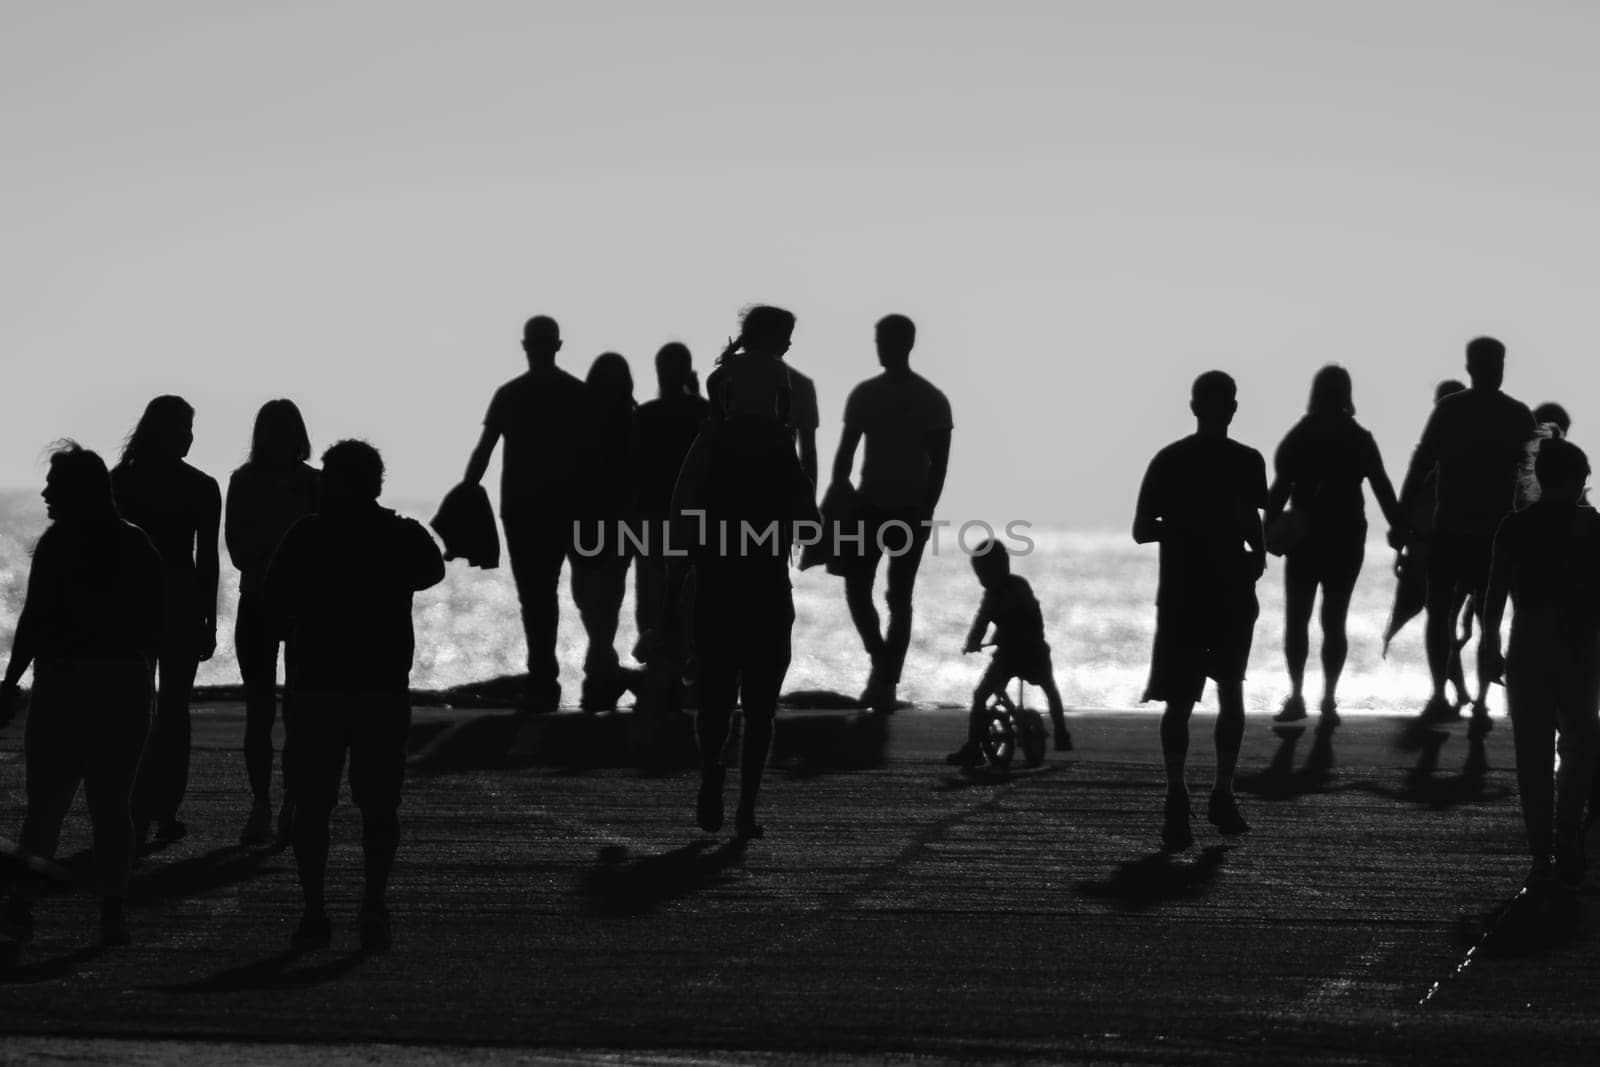 Monochrome image of silhouettes of people walking at sunset by Studia72